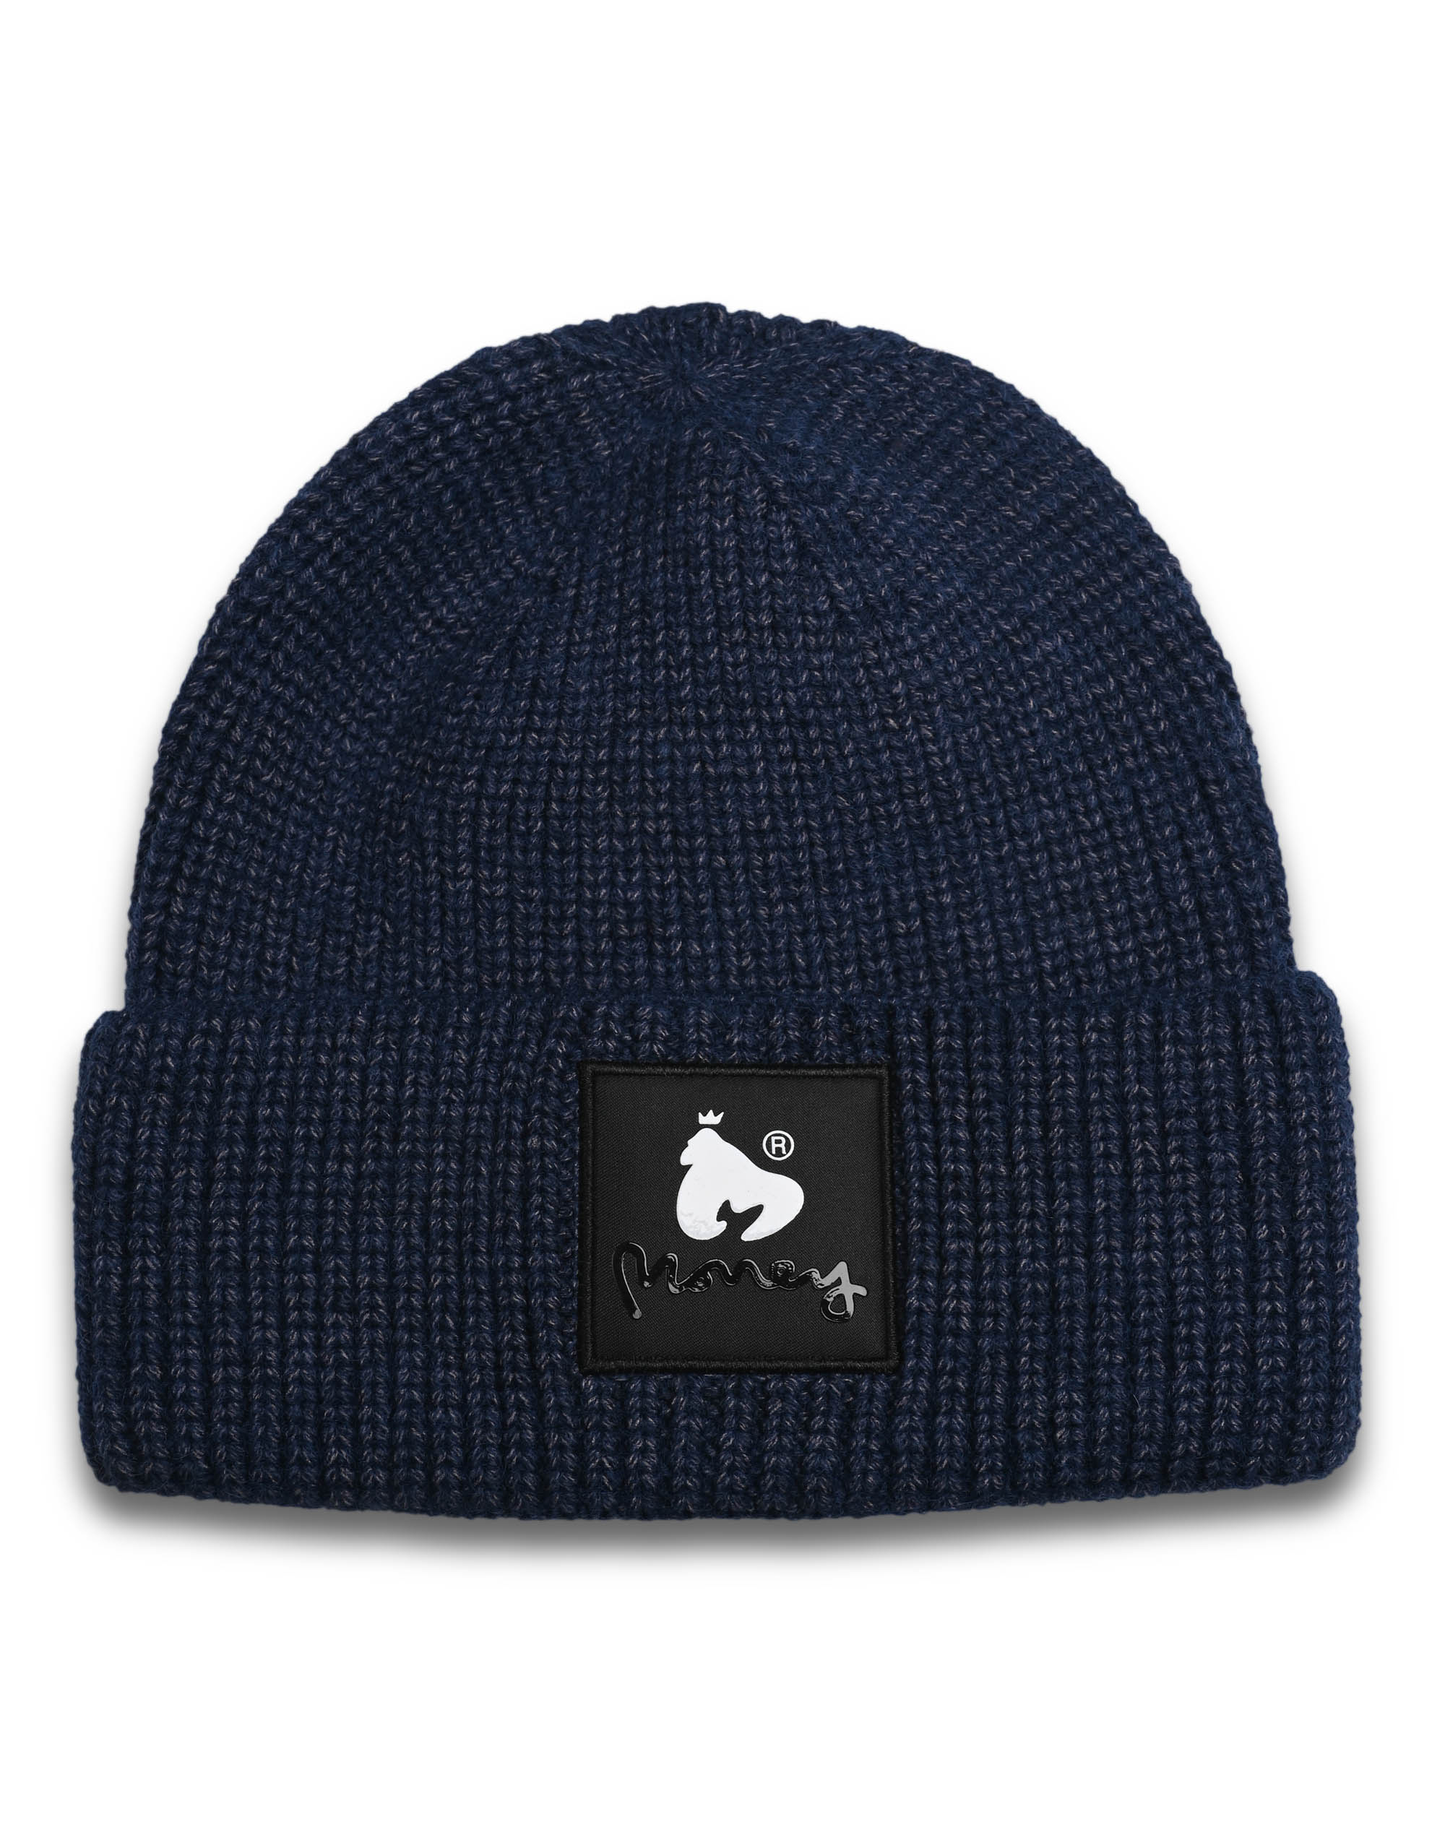 Combo Patch Beanie Navy